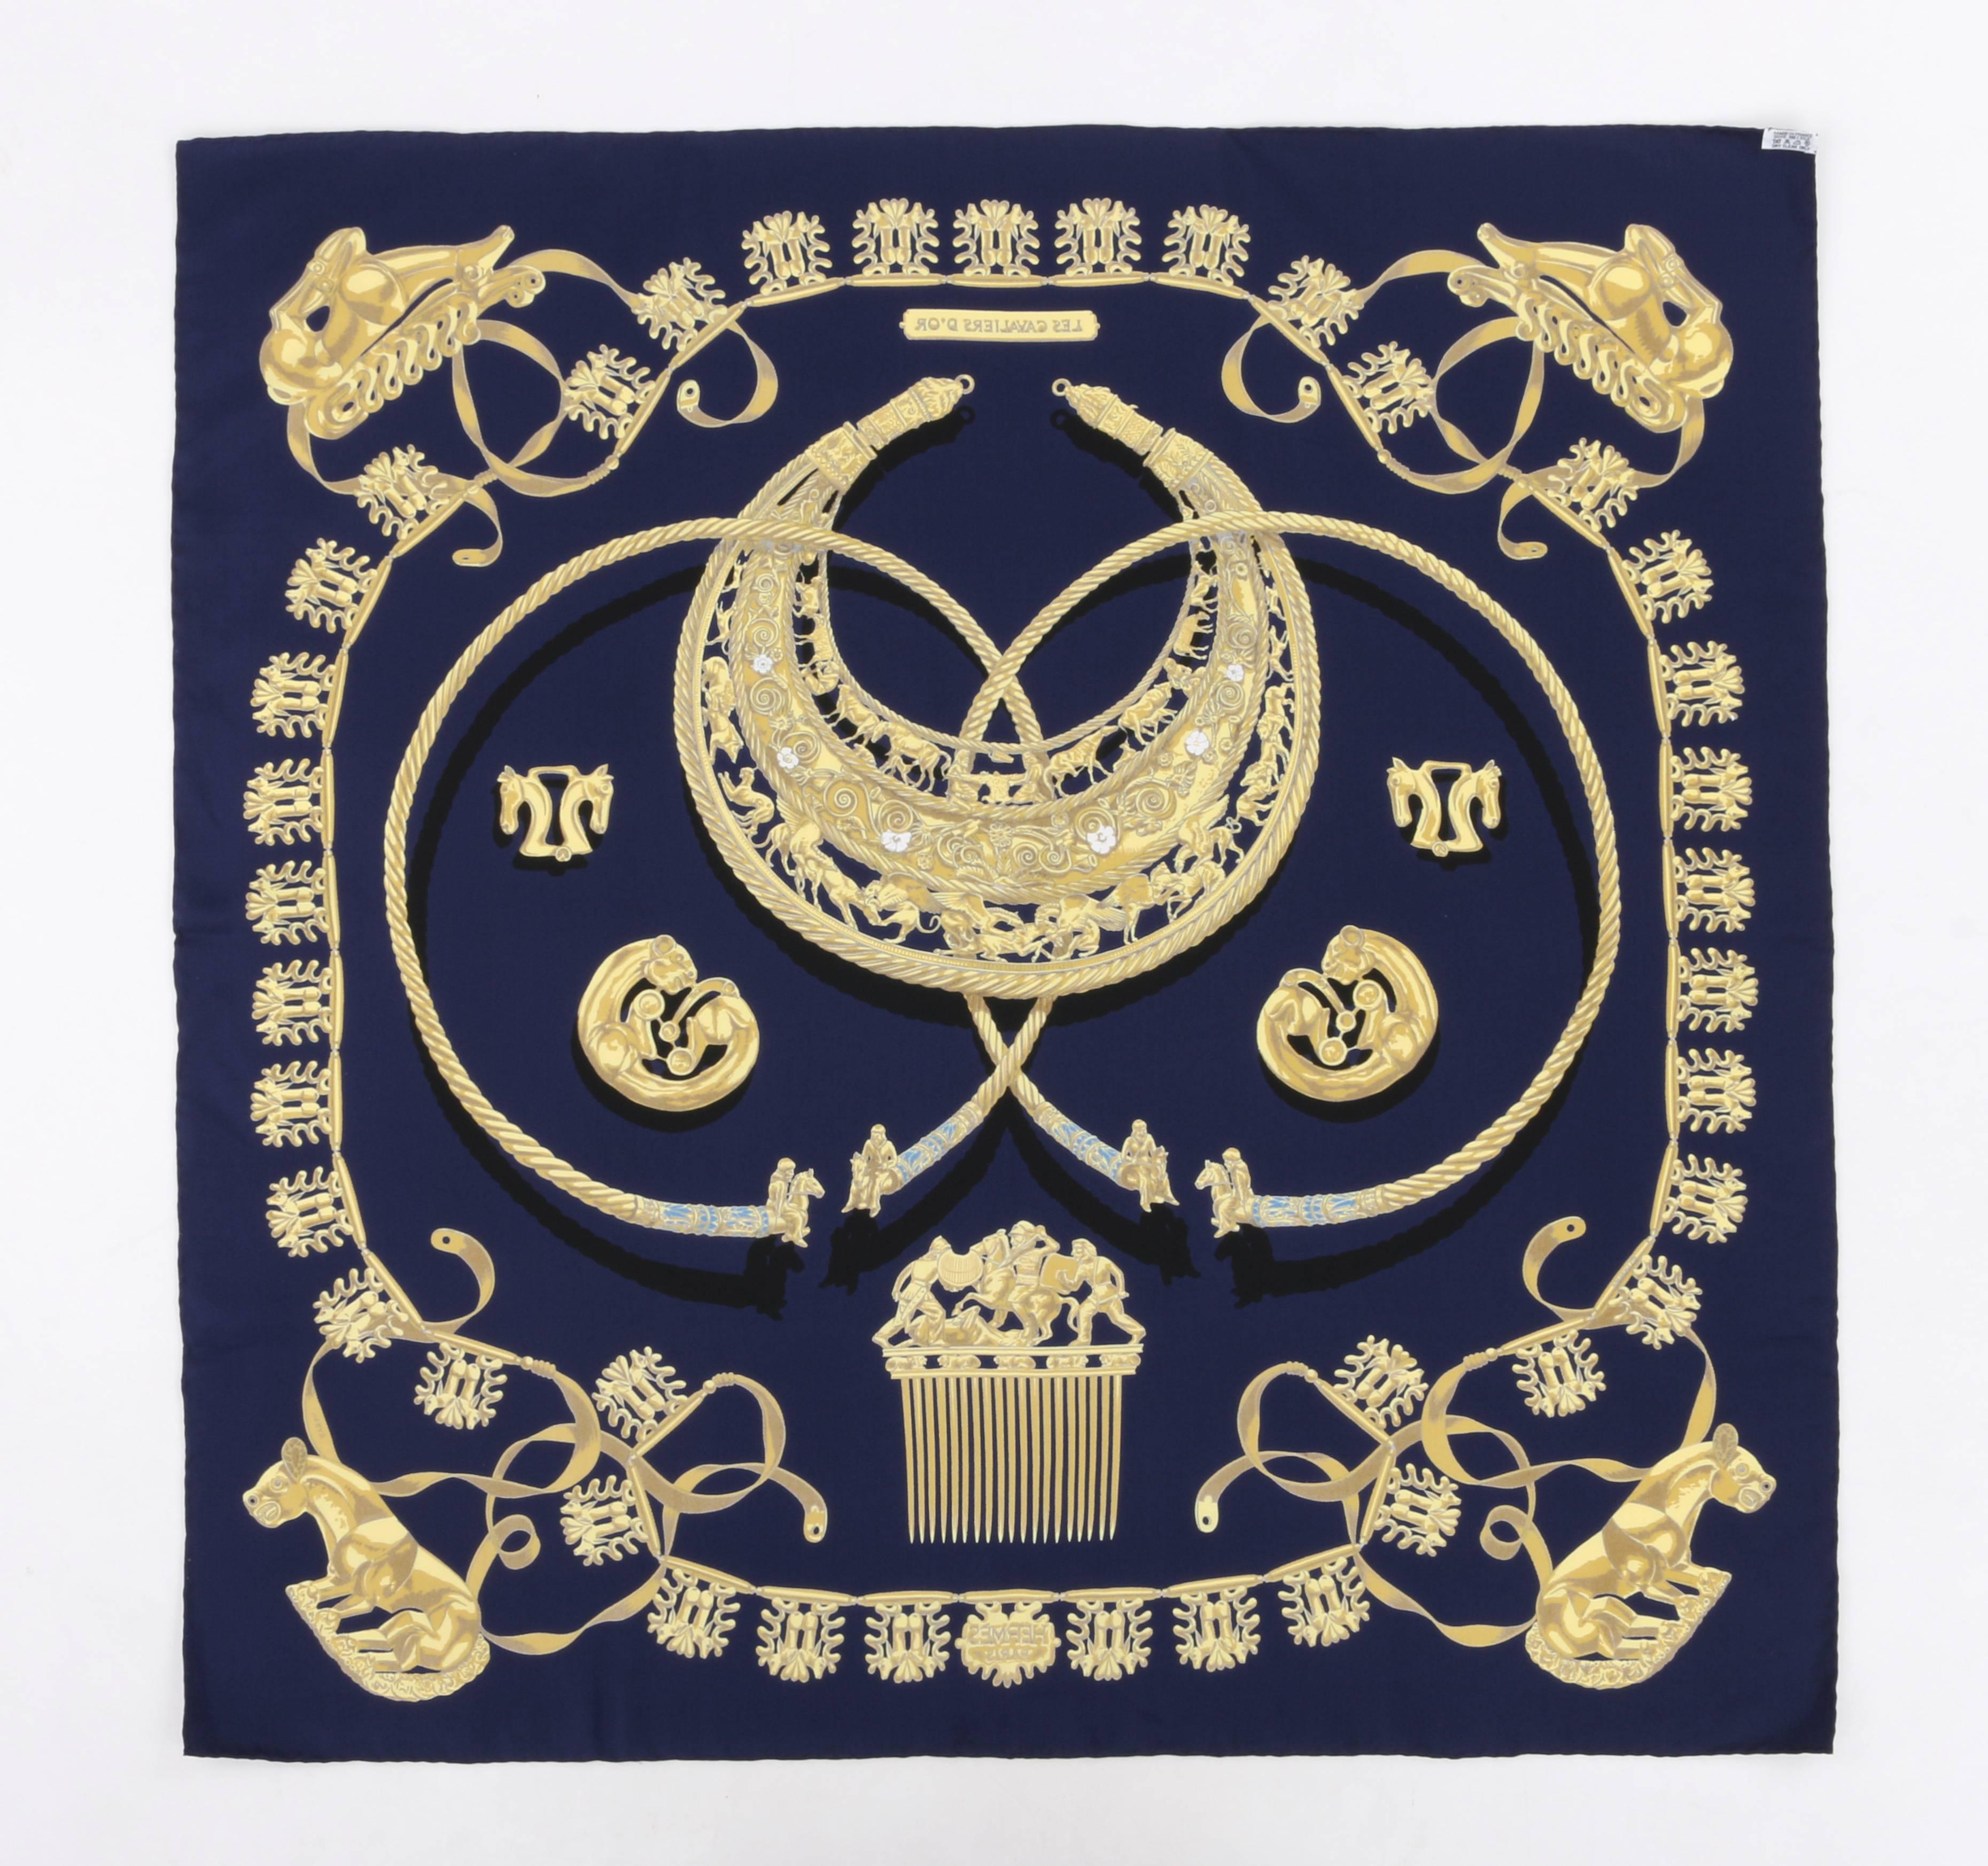 Hermes "Les Cavaliers D'or" designed by Vladimir Rybaltchenko (Rybal) silk scarf. Navy background with gold Greek Scythian art jewelry; pectorals, horse combs, necklaces, amulets, and clothing buckles printed throughout. "Les